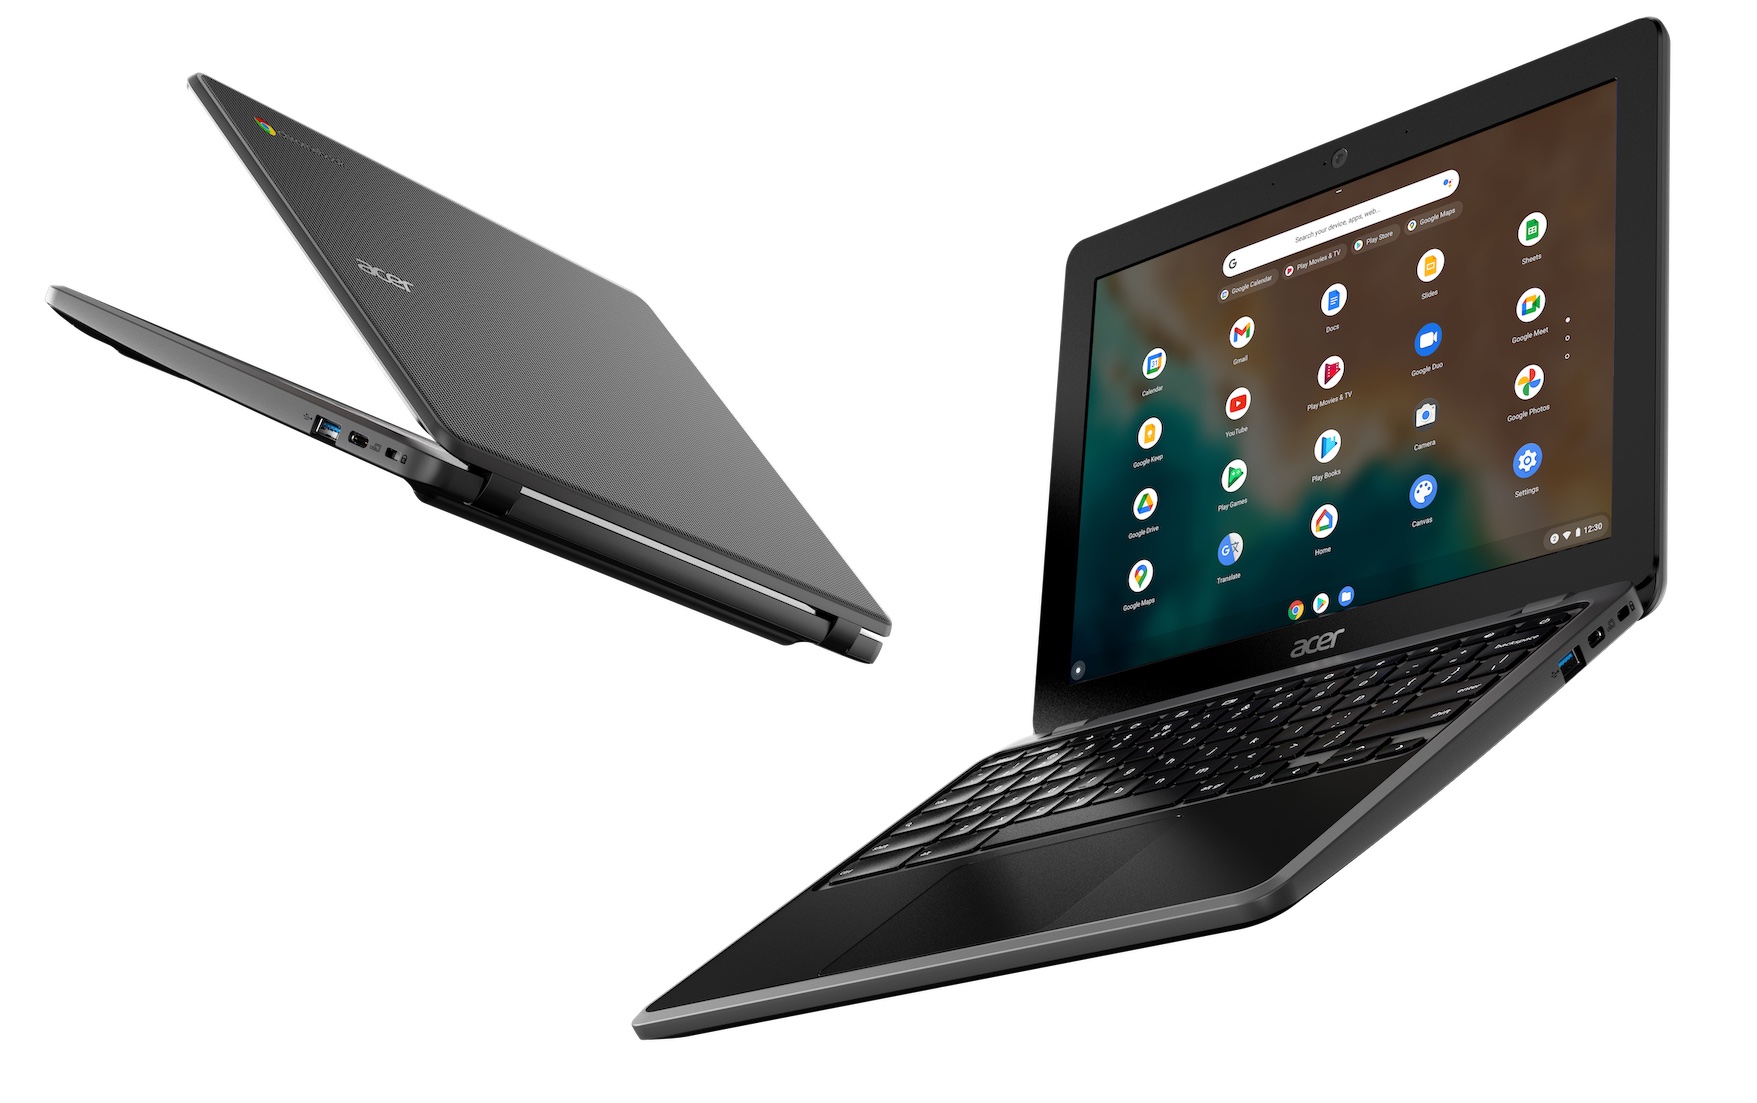 Acer Boosts Learning with Four Durable Chromebooks for Education